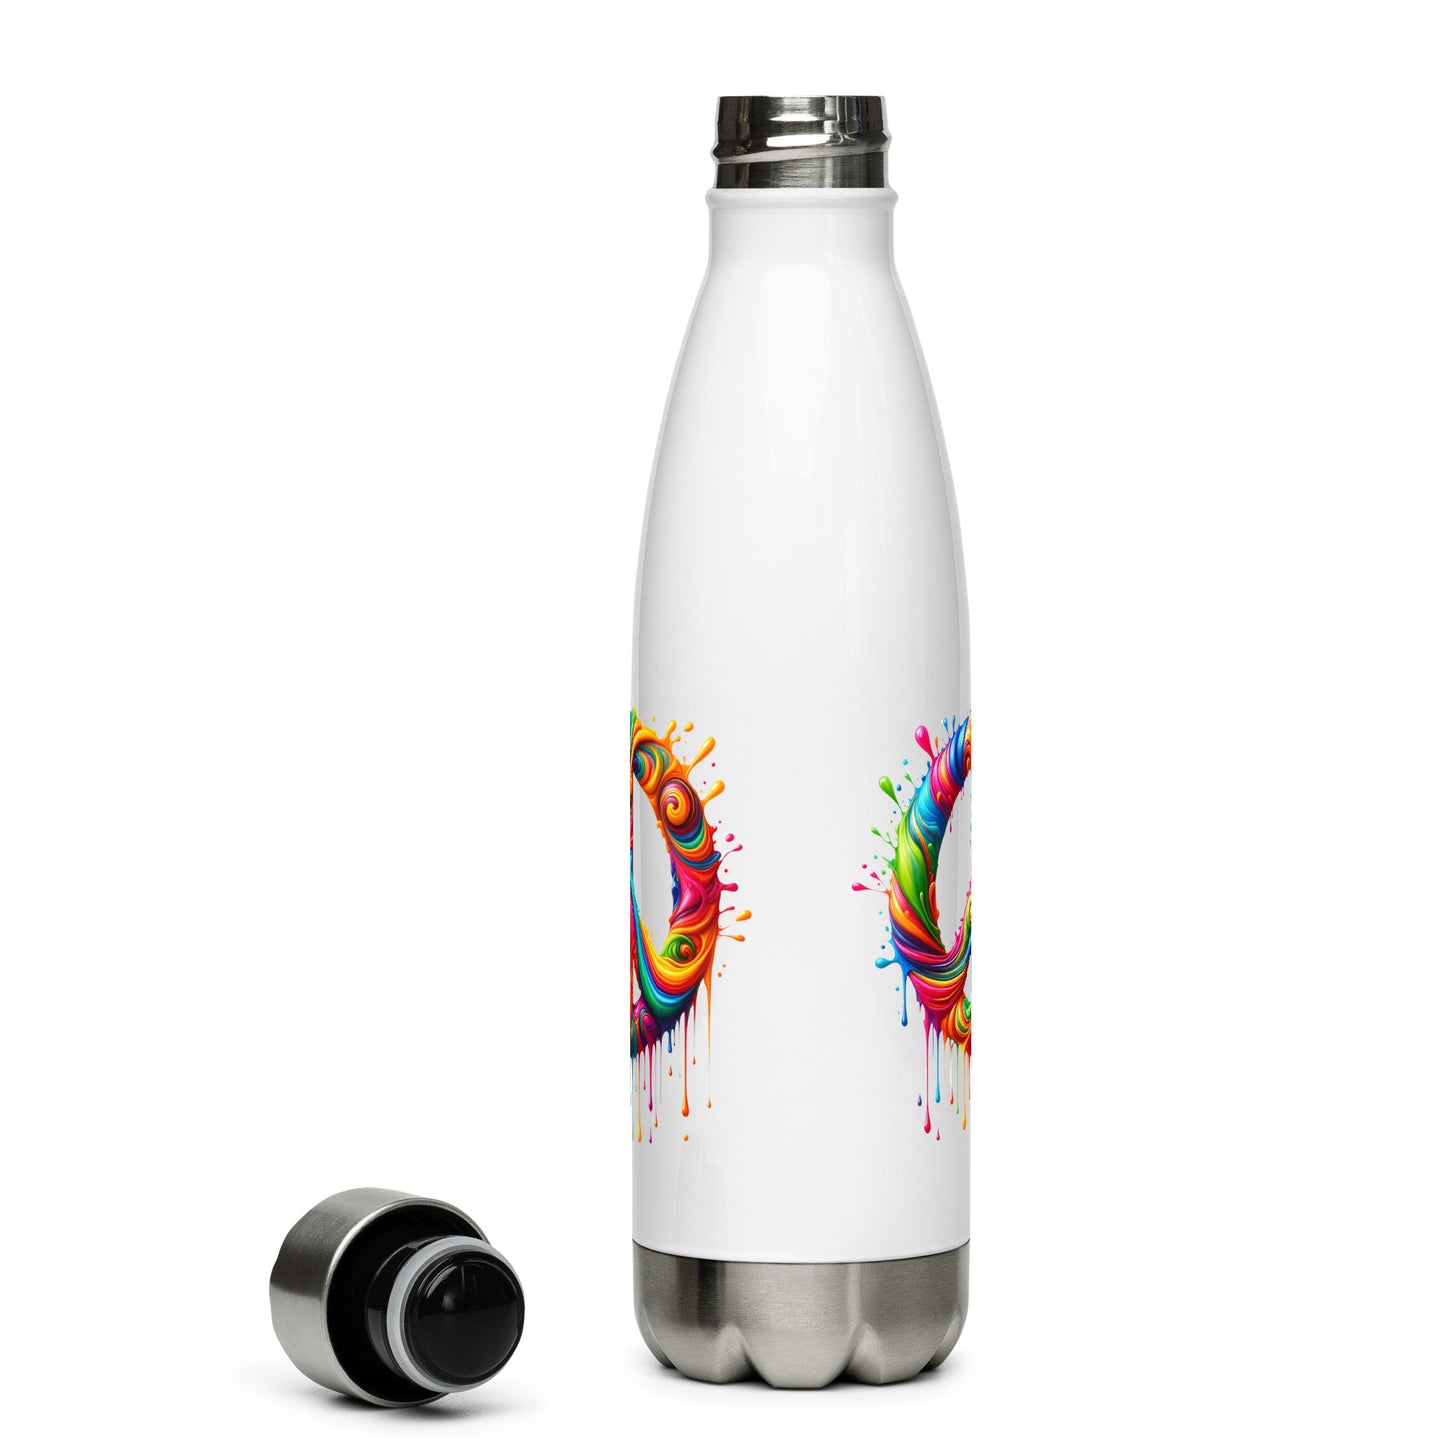 Dripping Colors of Peace Stainless steel water bottle